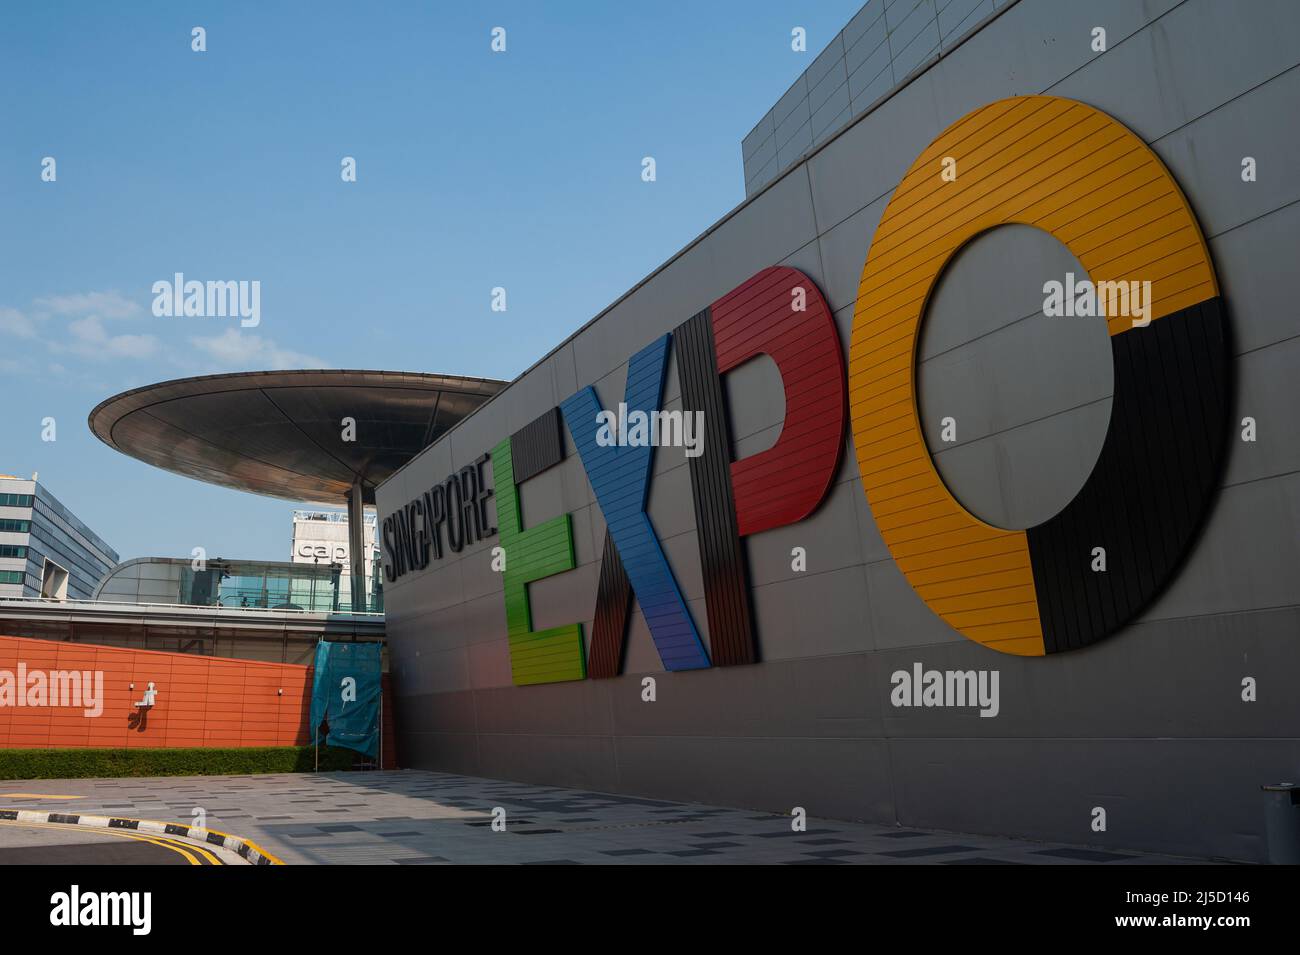 04/18/2021, Singapore, Republic of Singapore, Asia - Exterior view of the Singapore Expo convention and exhibition center right next to the futuristic MRT Metro stop in Tampines. [automated translation] Stock Photo